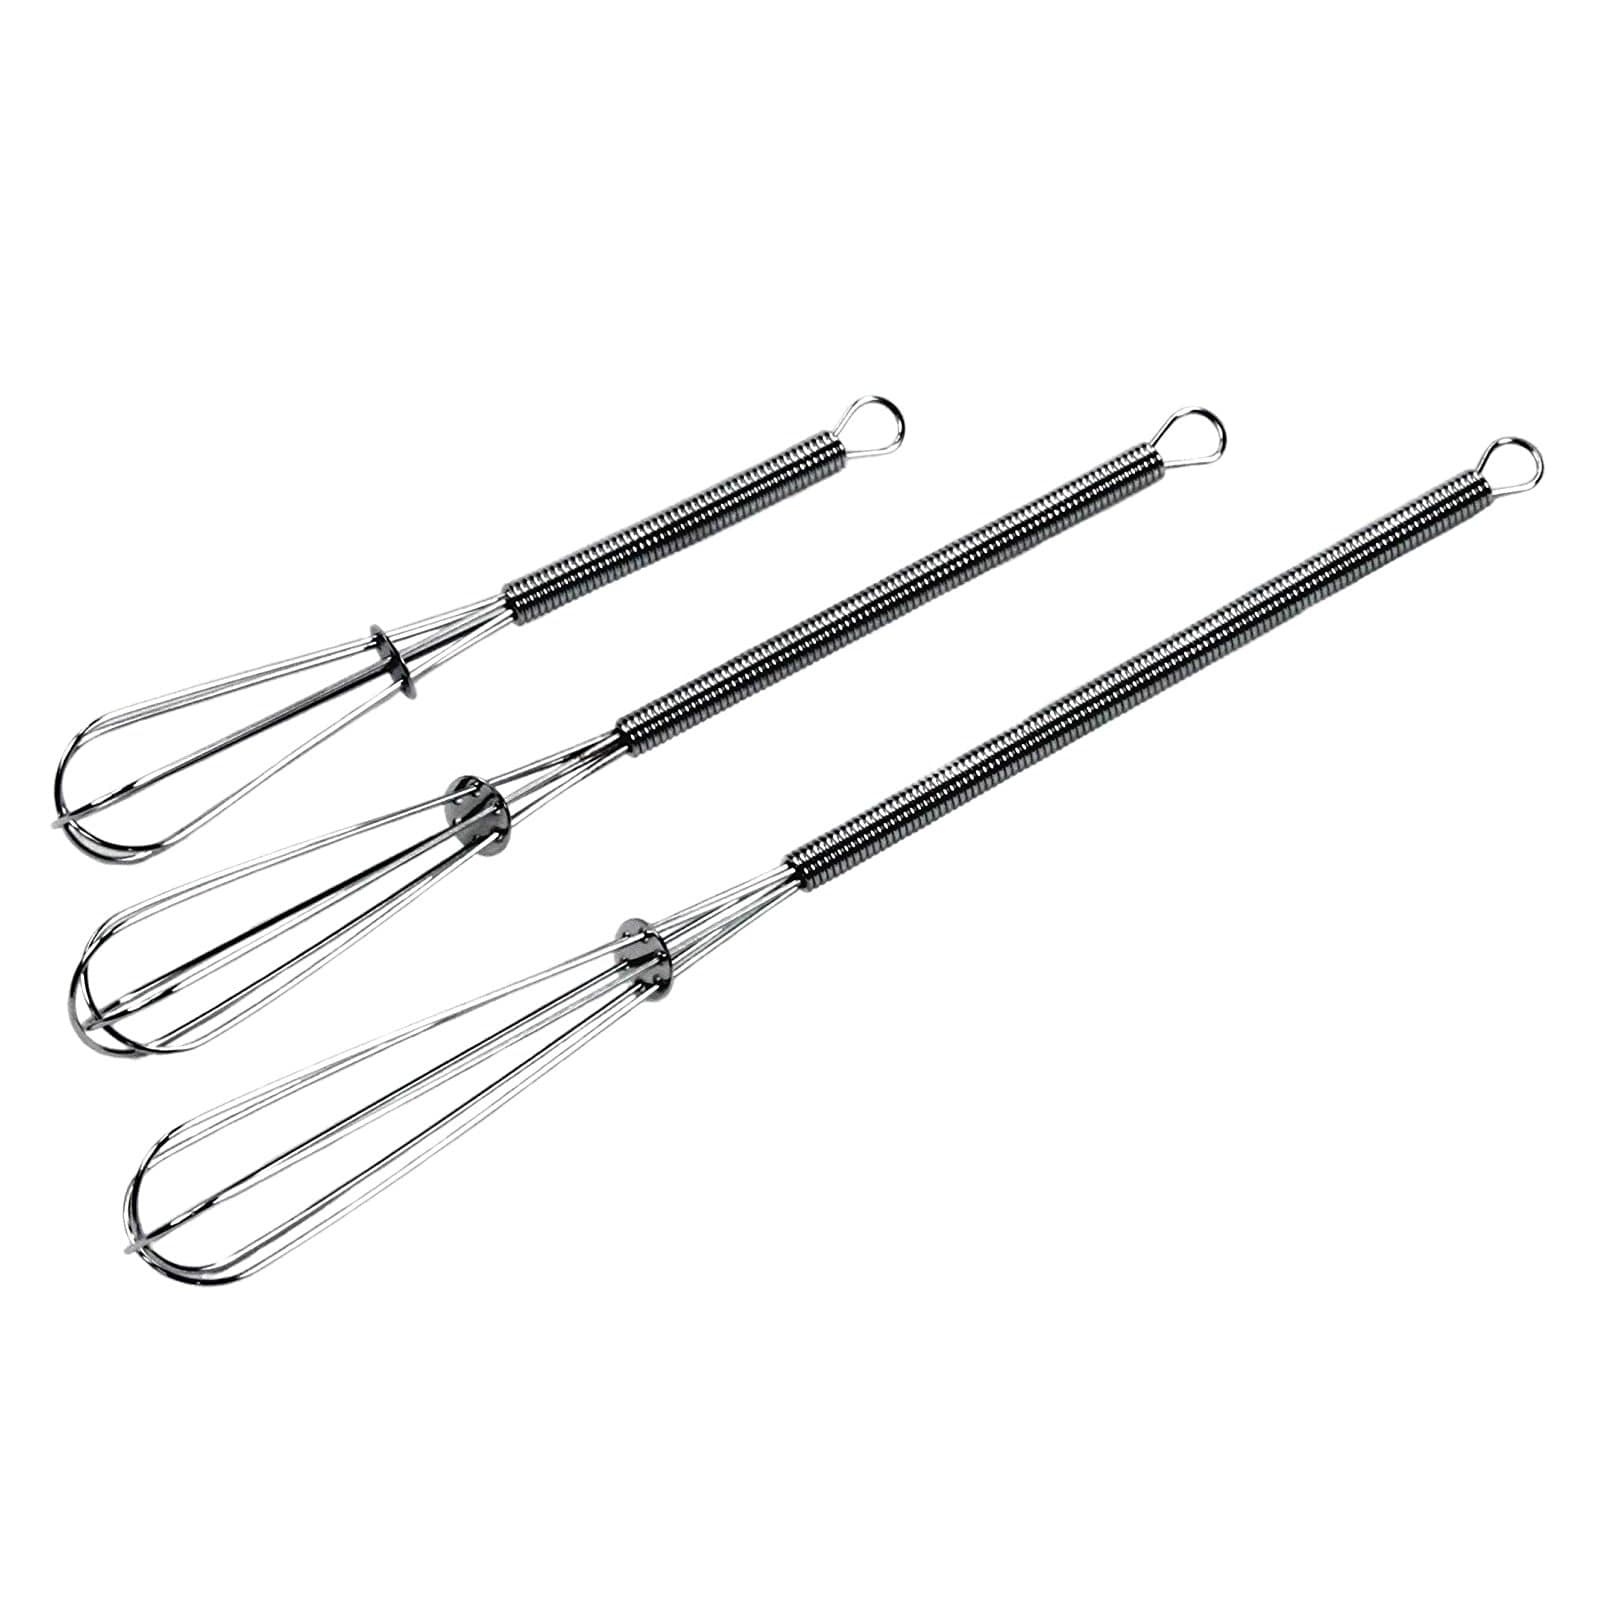 Chef Craft 3pc Chrome Plated Steel Mini Whisk Set - Great for